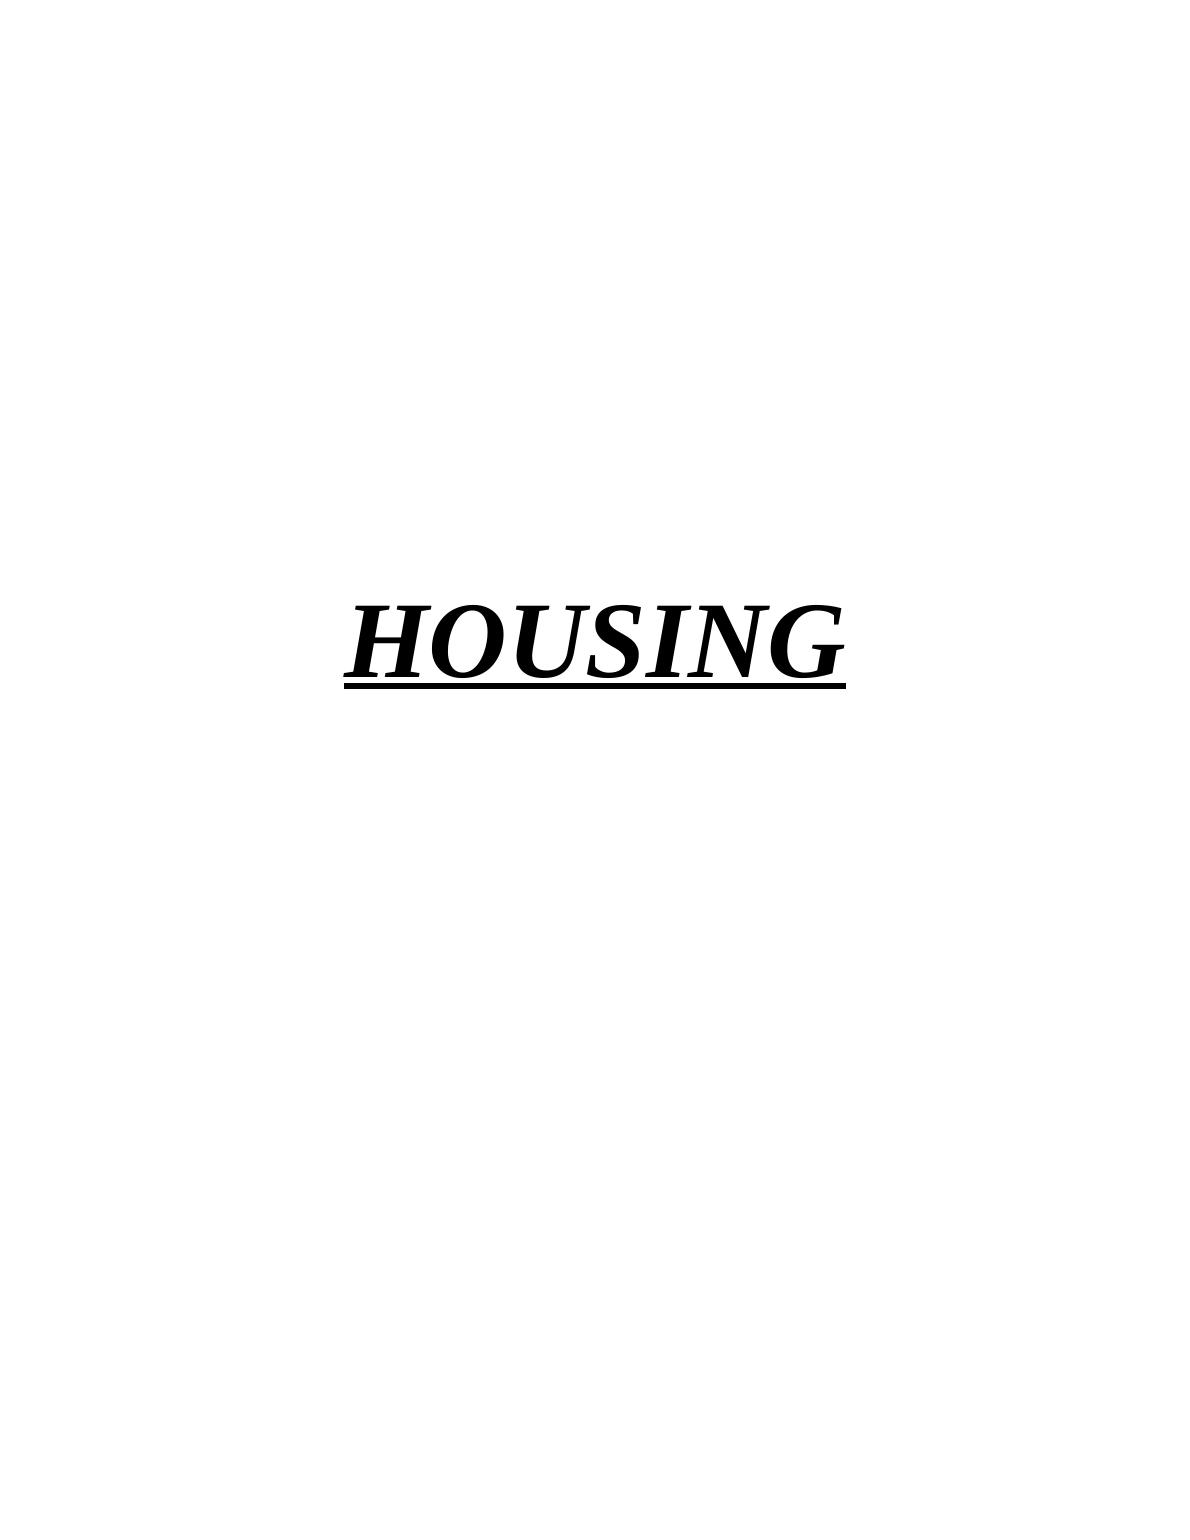 assignment in housing